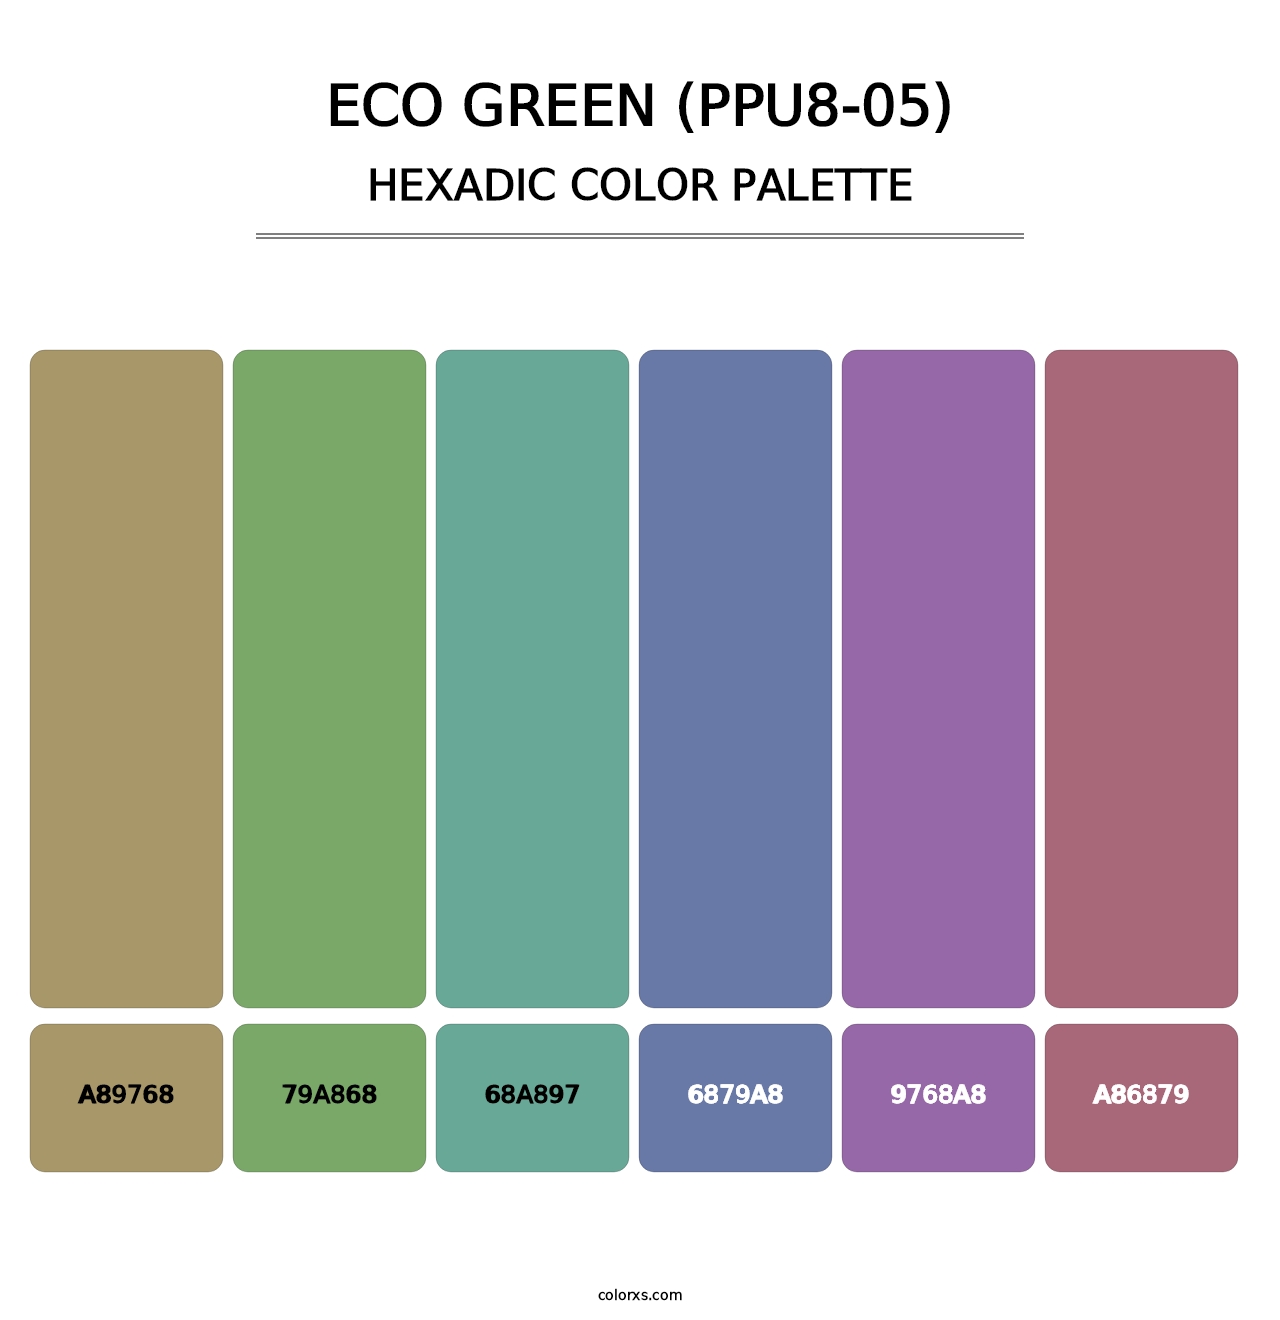 Eco Green (PPU8-05) - Hexadic Color Palette